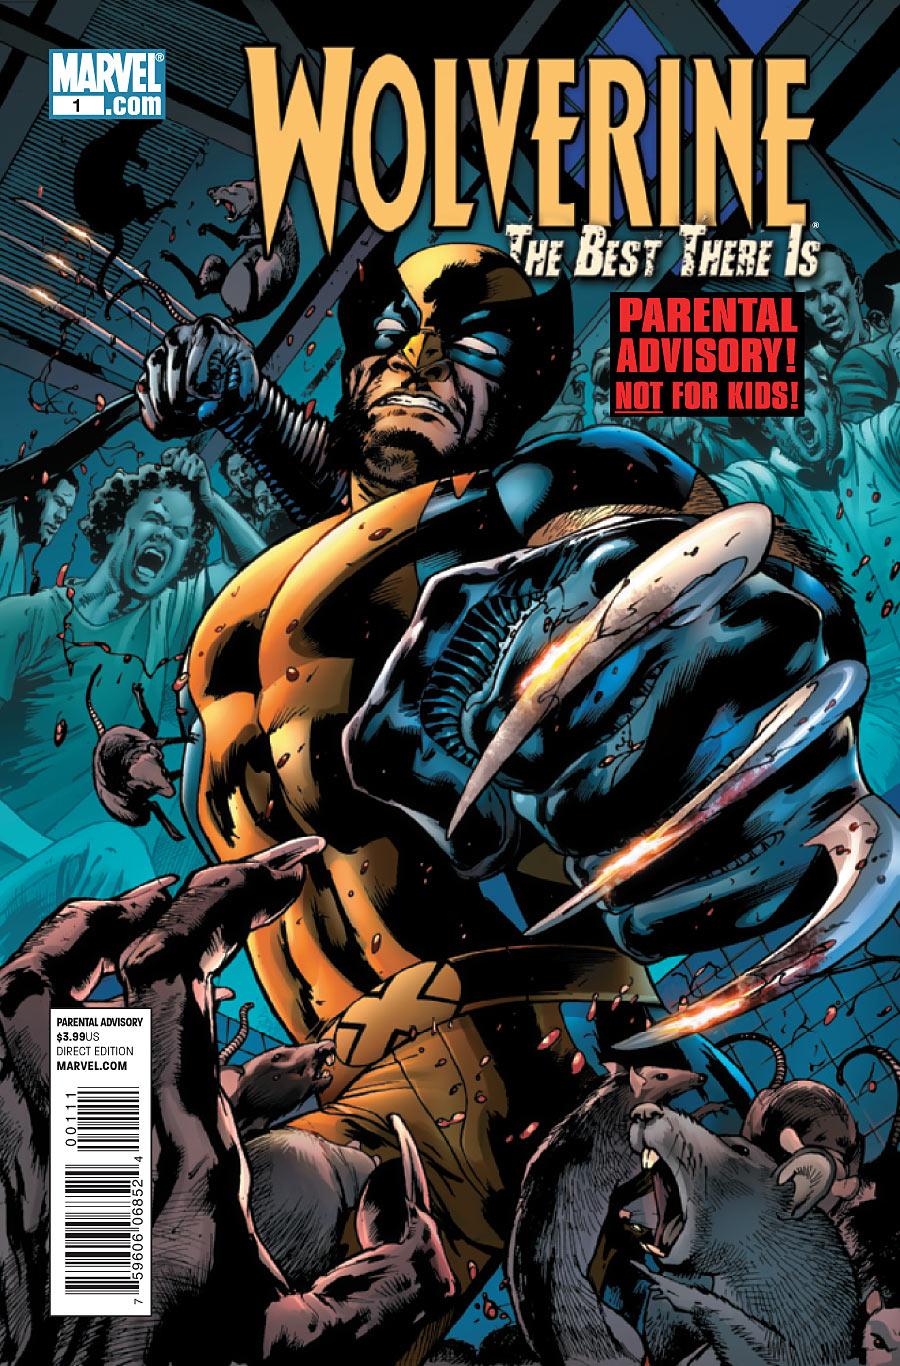 Wolverine: The Best There Is Vol. 1 #1